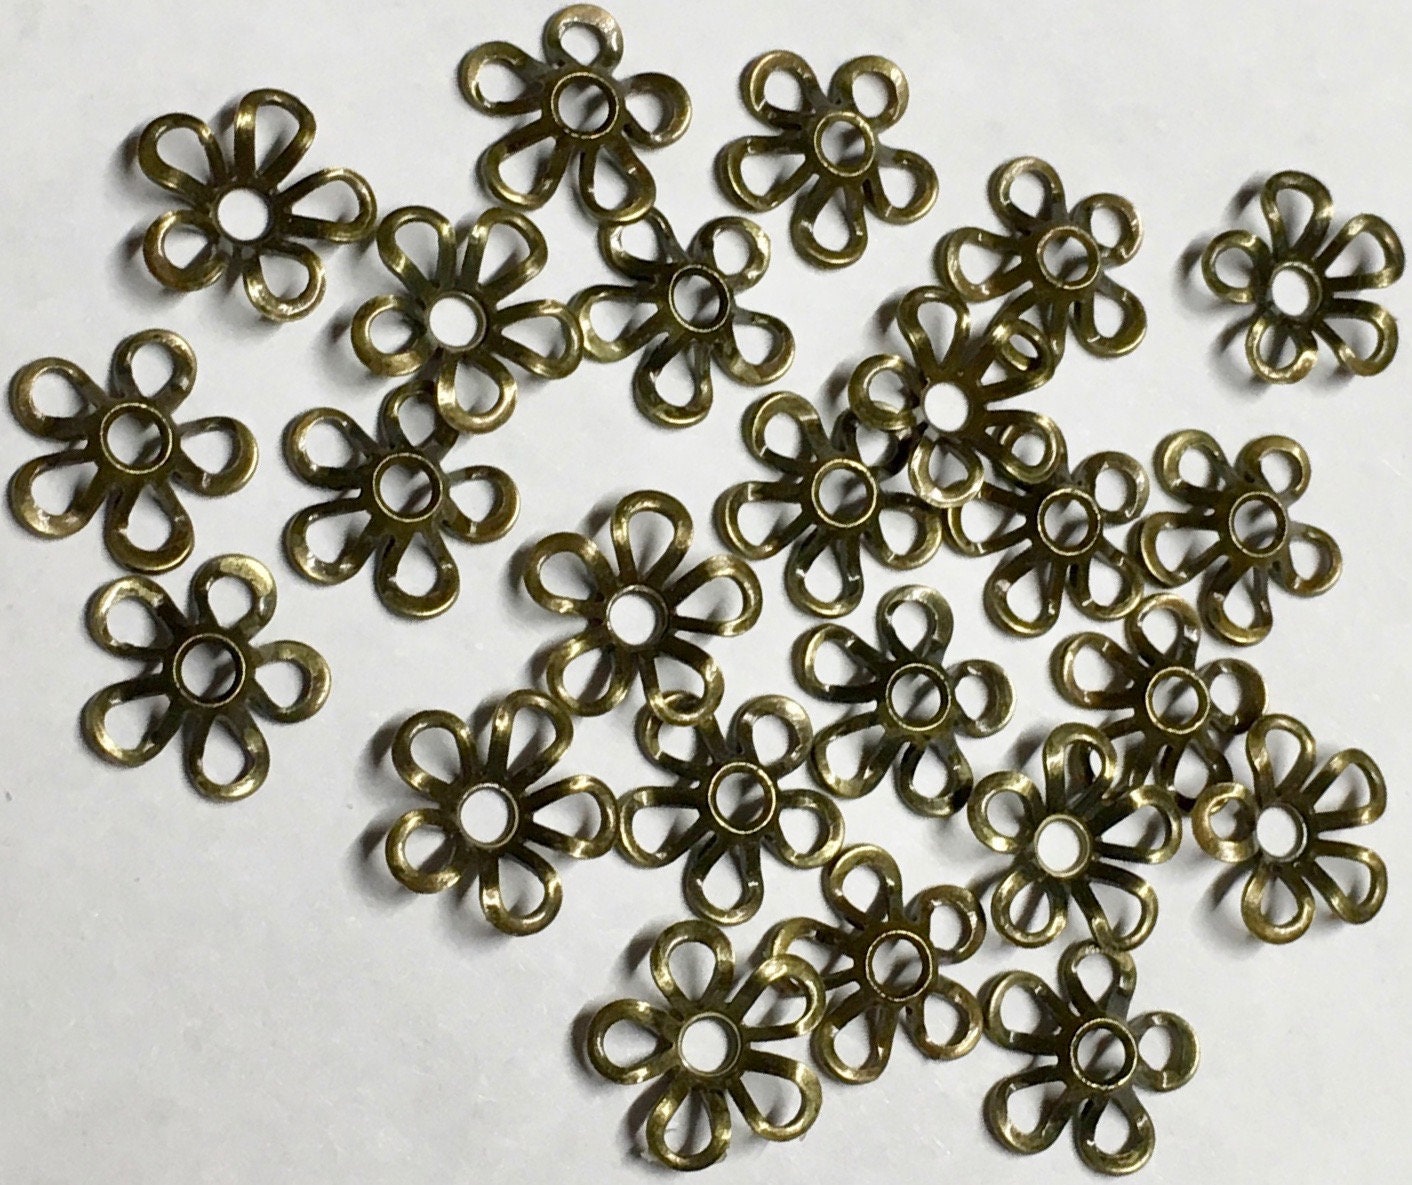 Gold, Silver and Bronze Filigree Flower Bead Caps With Hole Brass Metal Bead  Caps for Jewelry Making Supplies 10pcs 